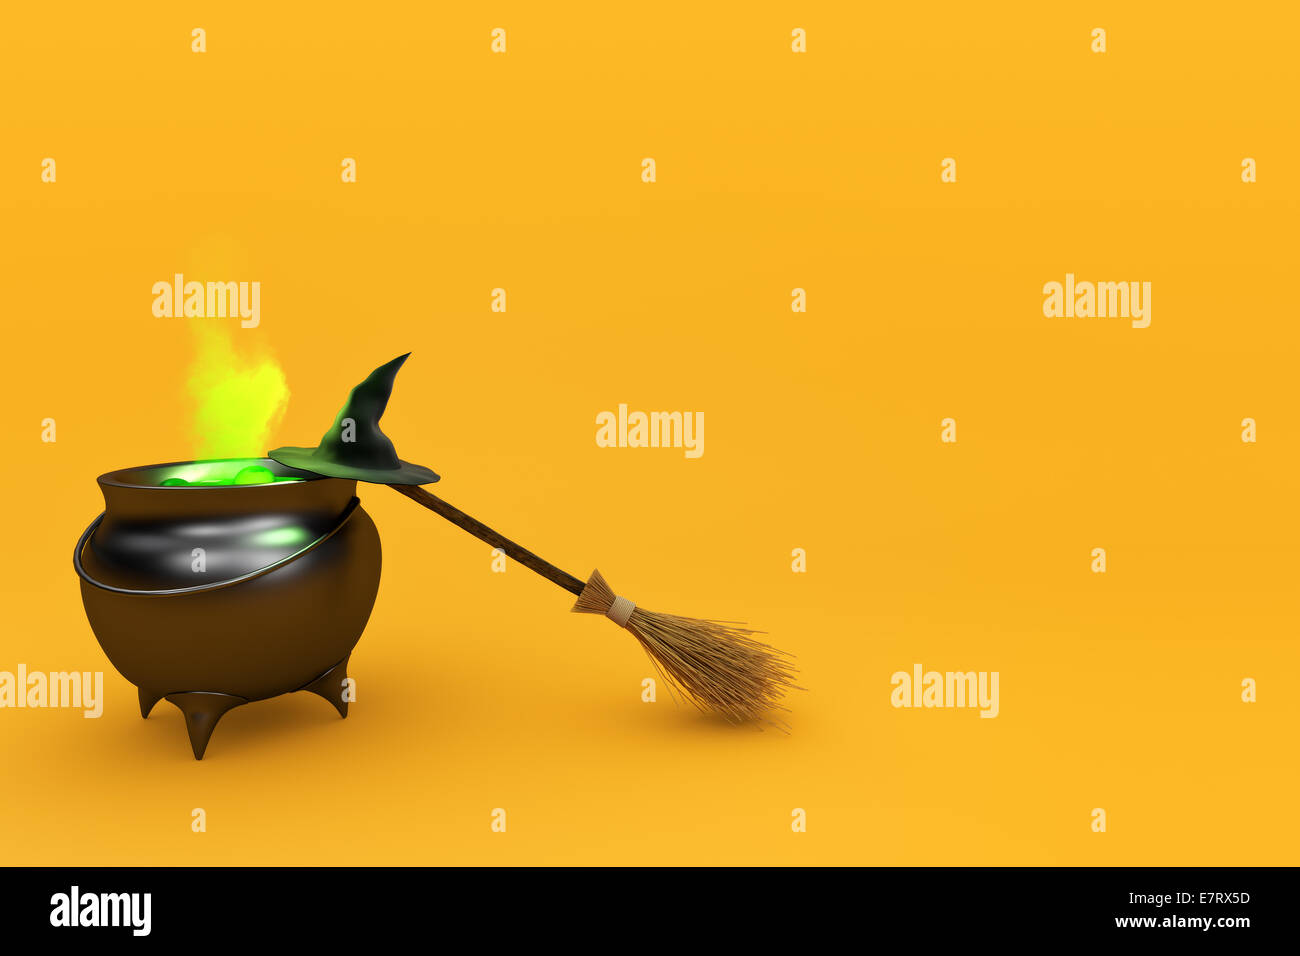 Boiling witch's cauldron with hat and broom isolated on orange background. Stock Photo